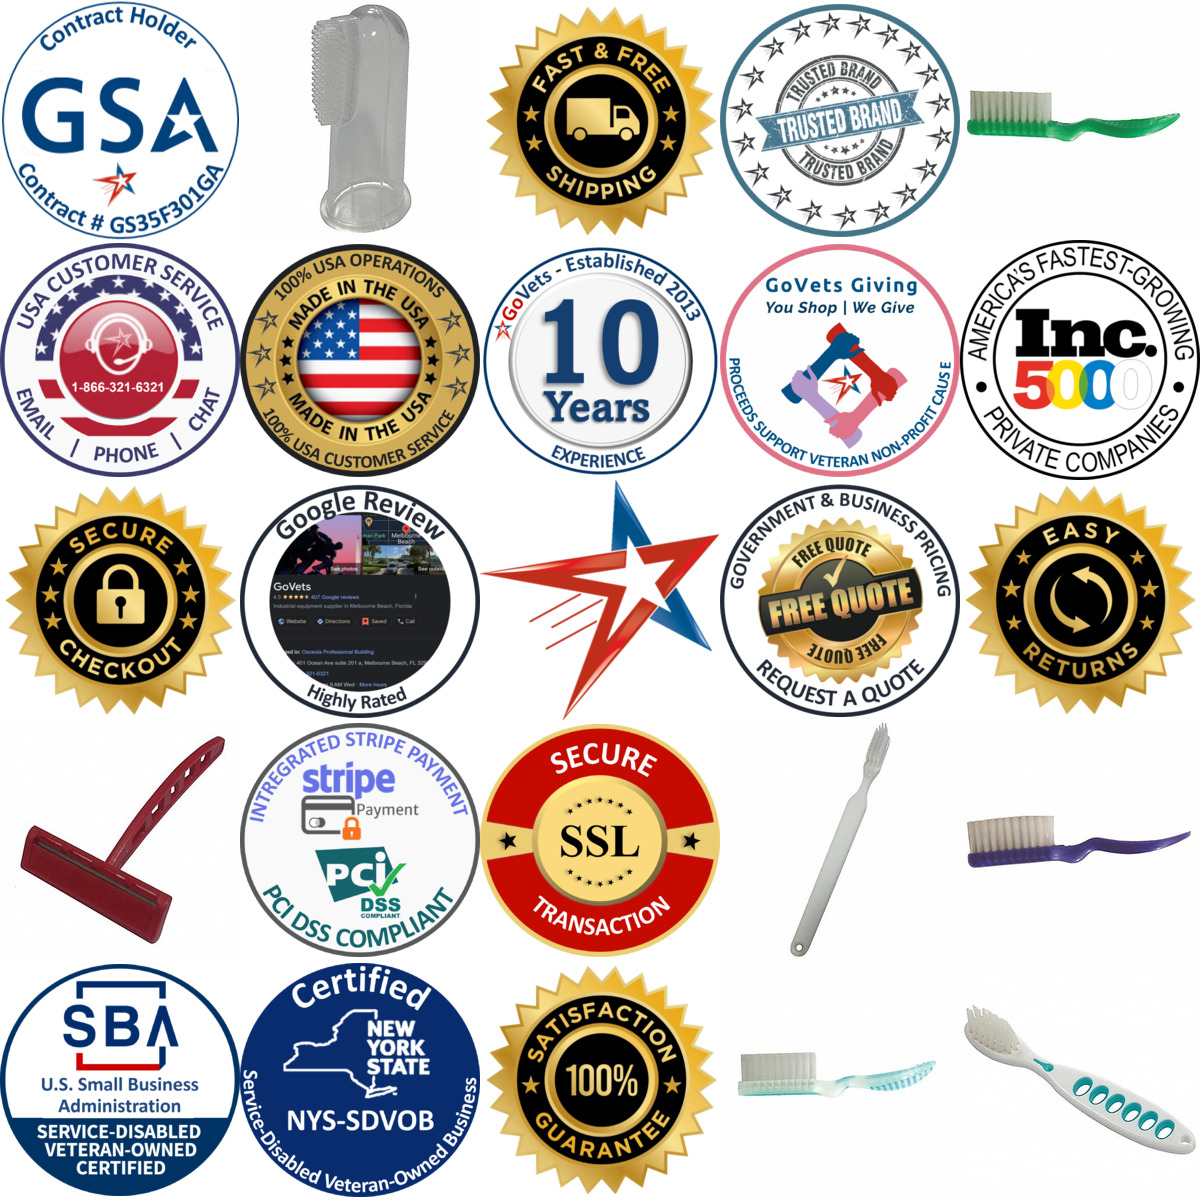 A selection of Correctional Facility Toothbrushes and Razors products on GoVets